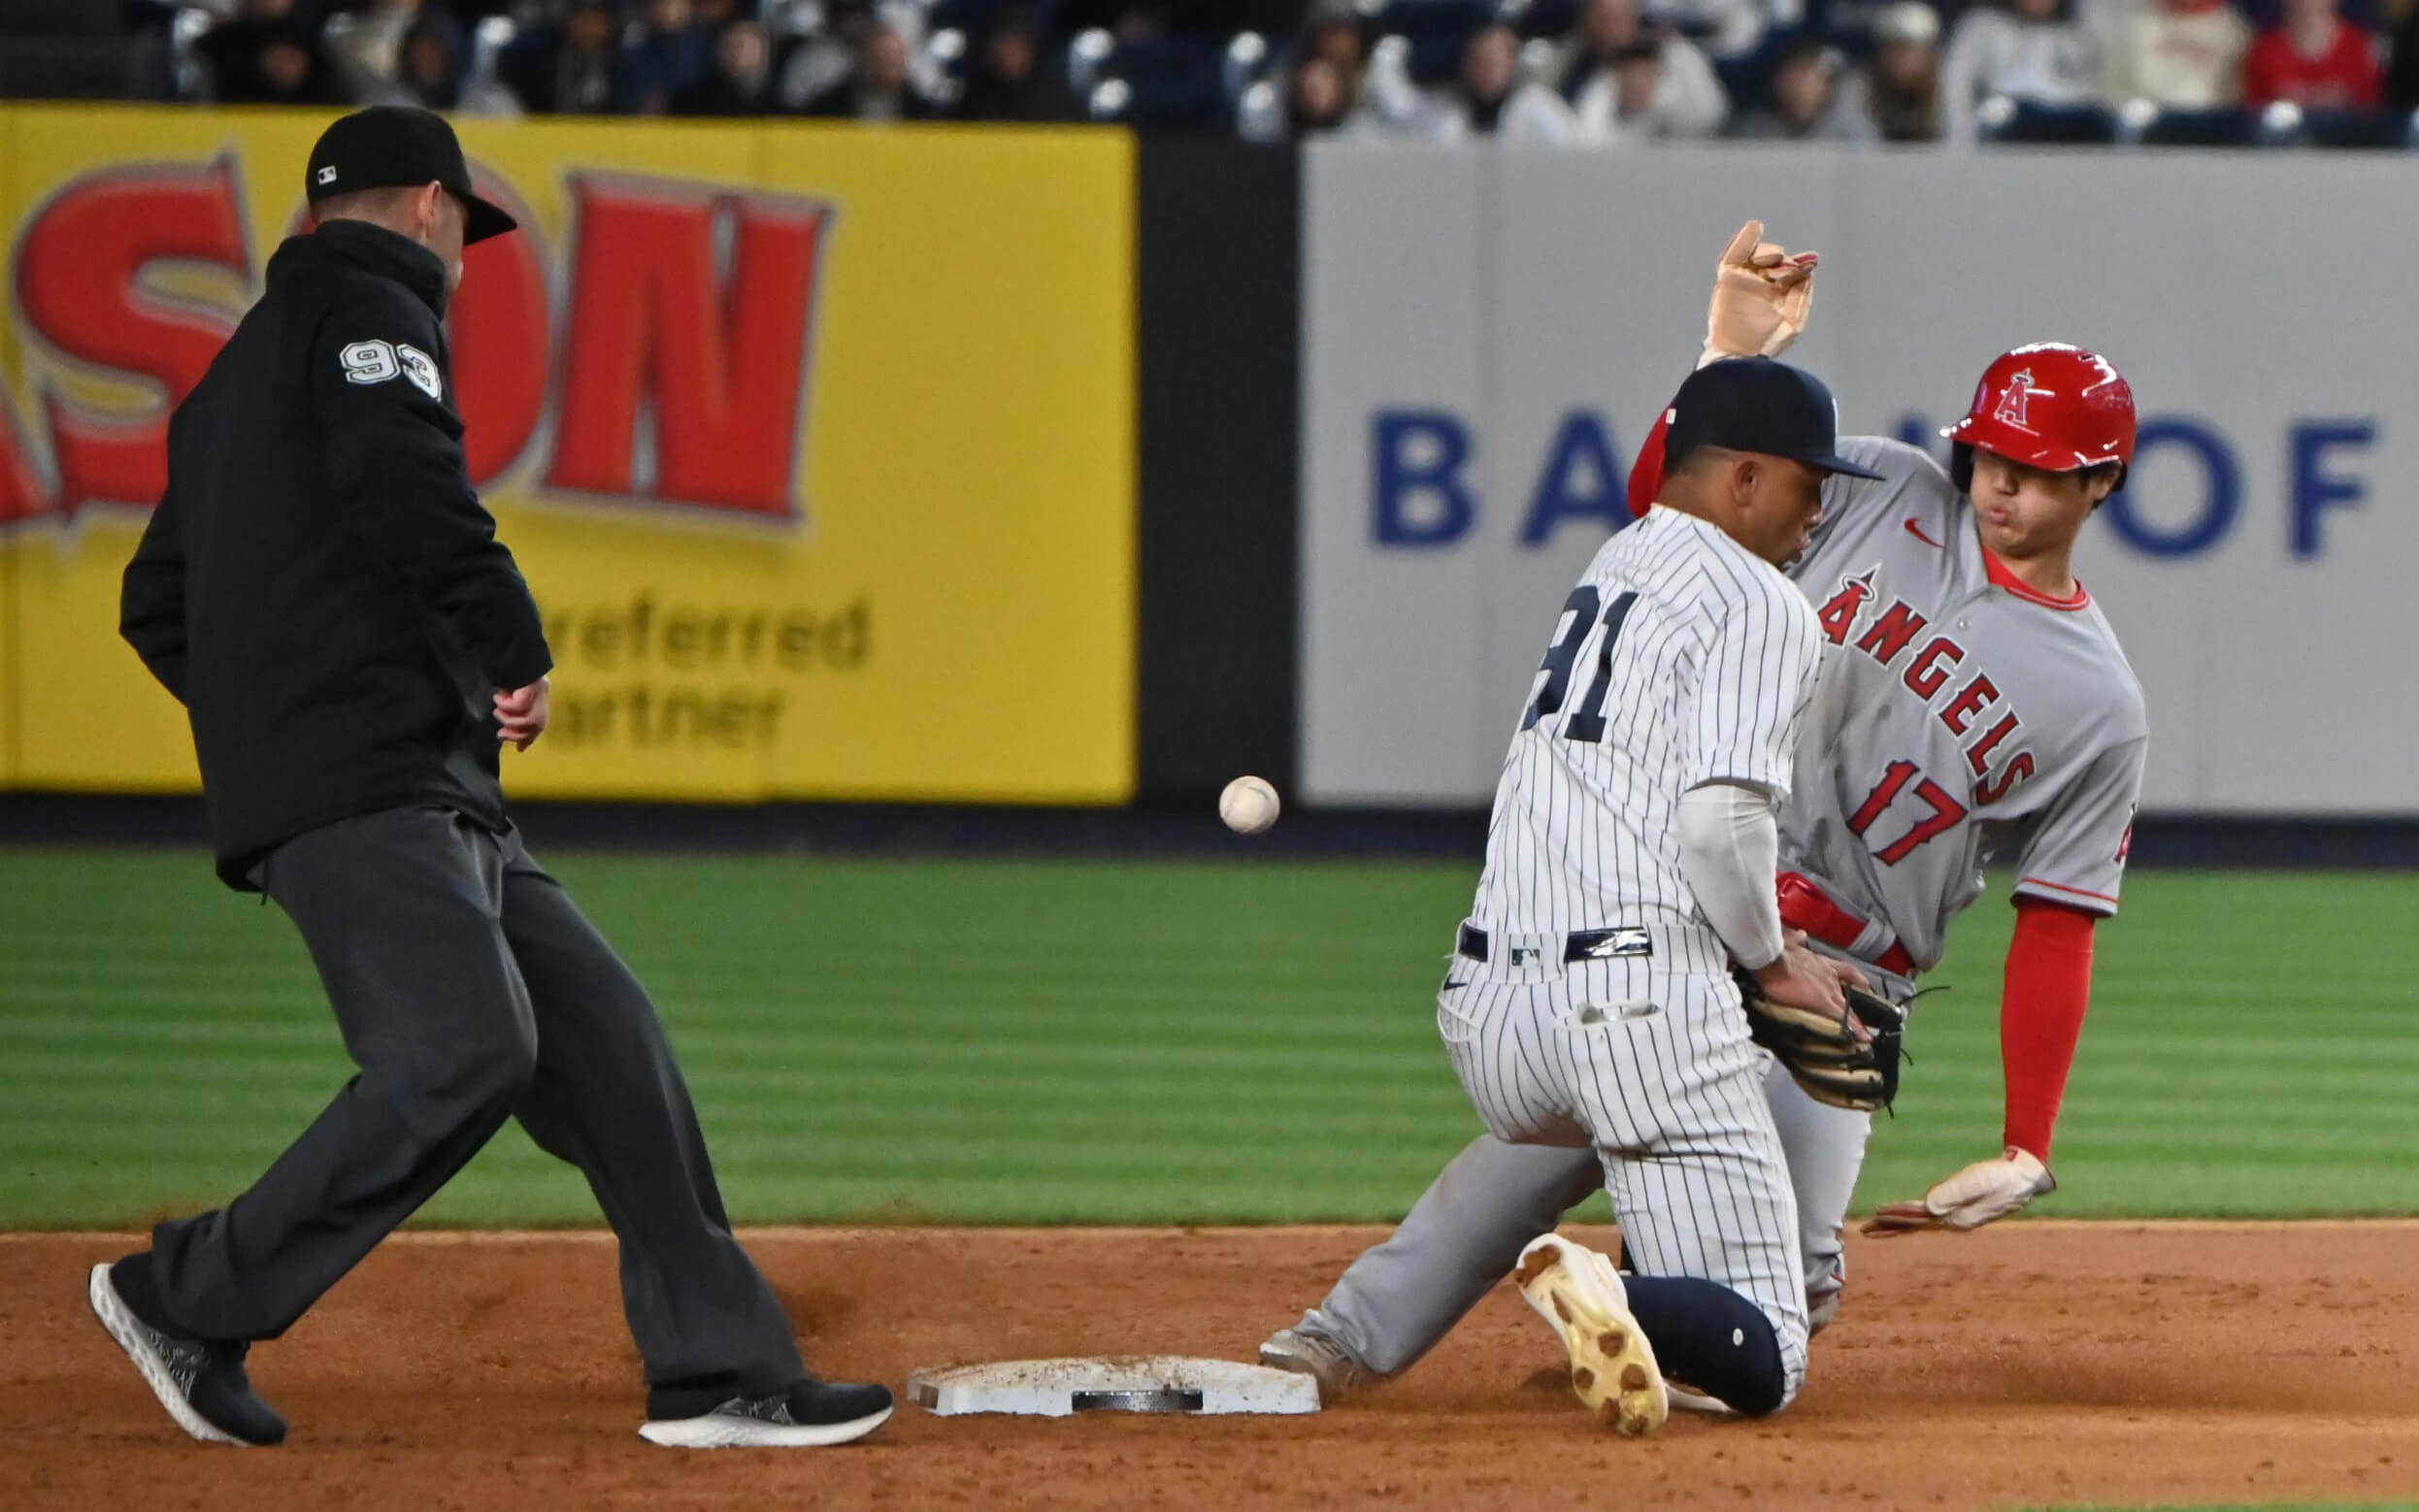 Los Angeles Angels' star Shohei Ohtani steals second base during a game between the Yankees and Angels on April 18, 2023.